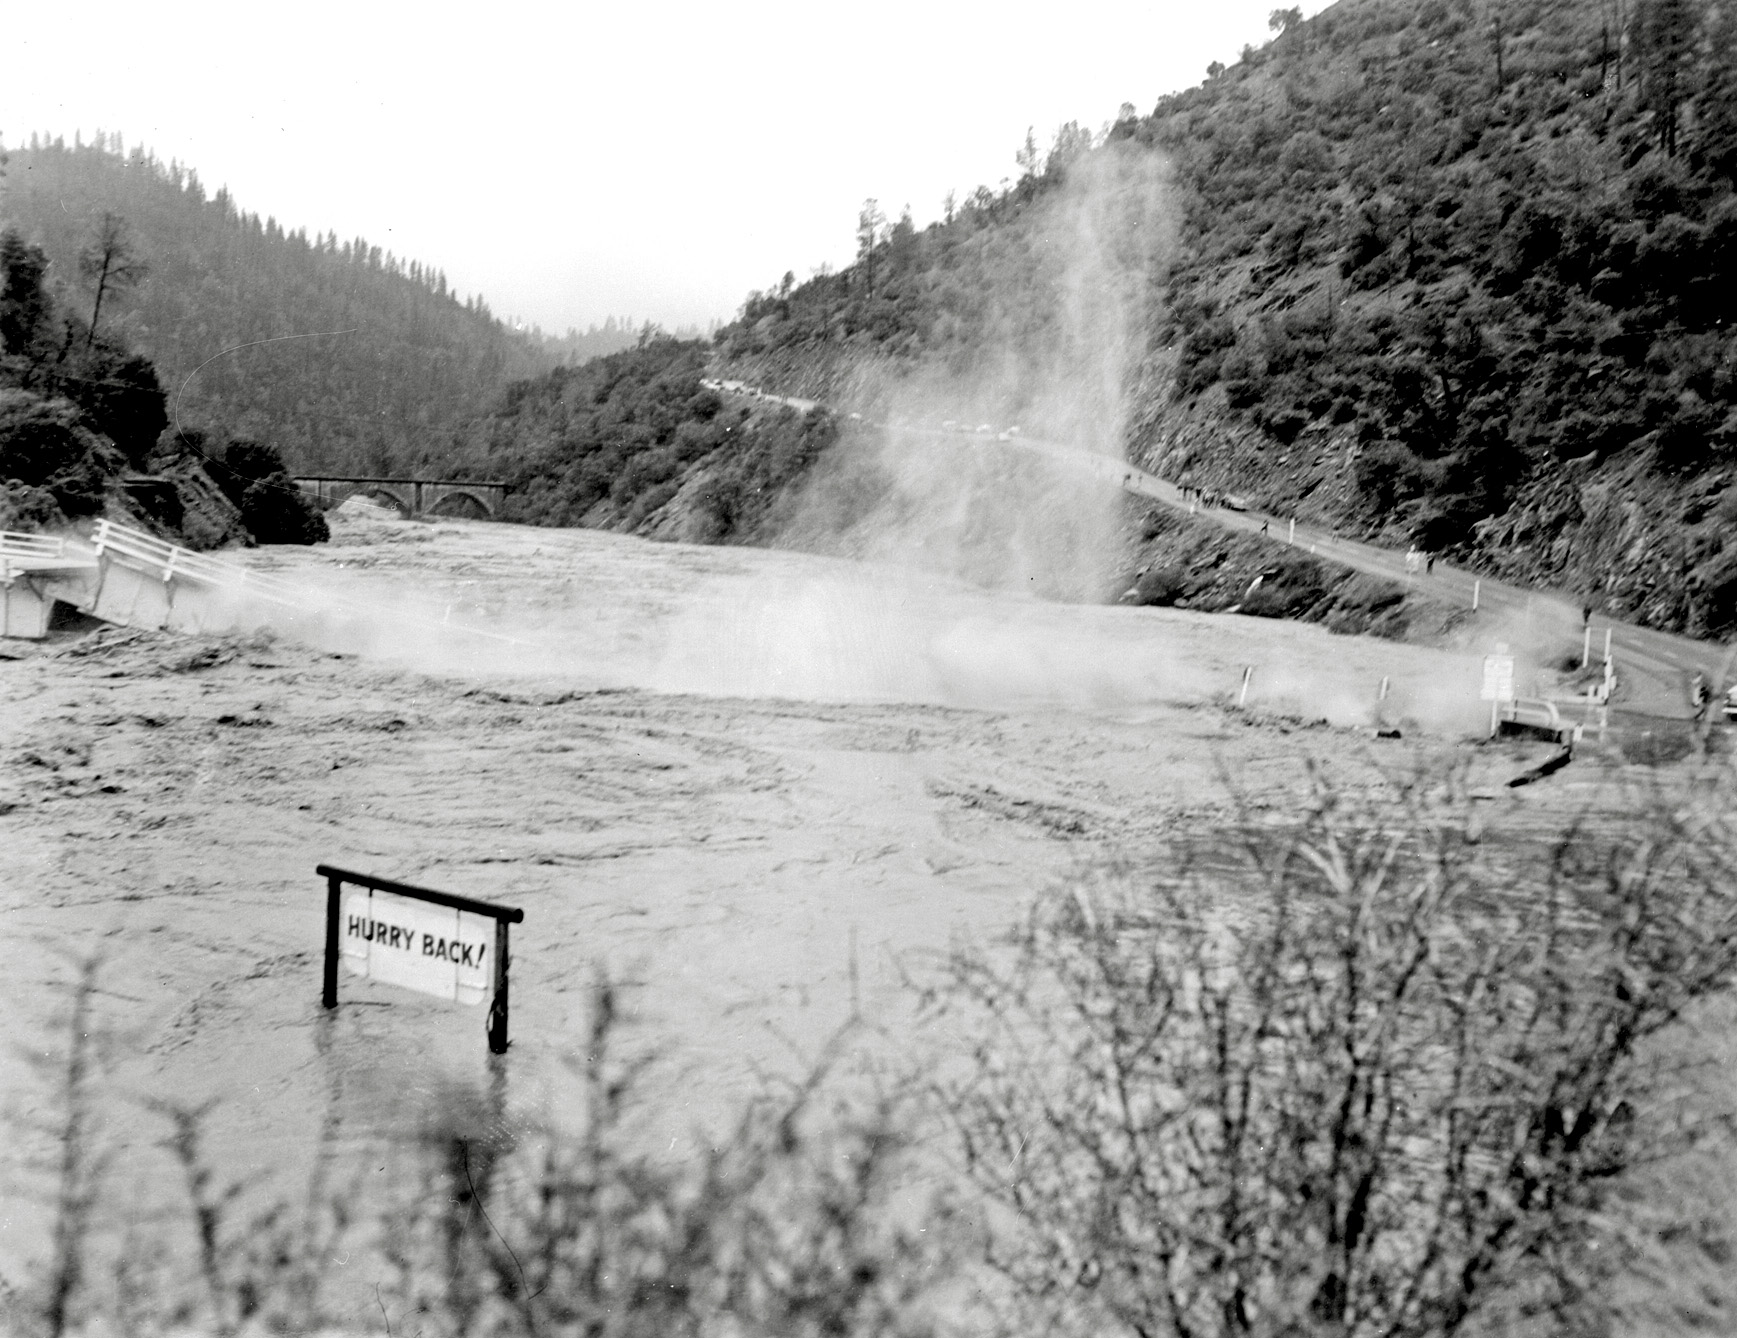 The California Highway 49 steel bridge river crossing could only withstand so much and finally succumbed to the water surge from the failure of Hell Hole Reservoir in December 1964. Norm Sayler Collection, Donner Summit Historical Society. View full size.